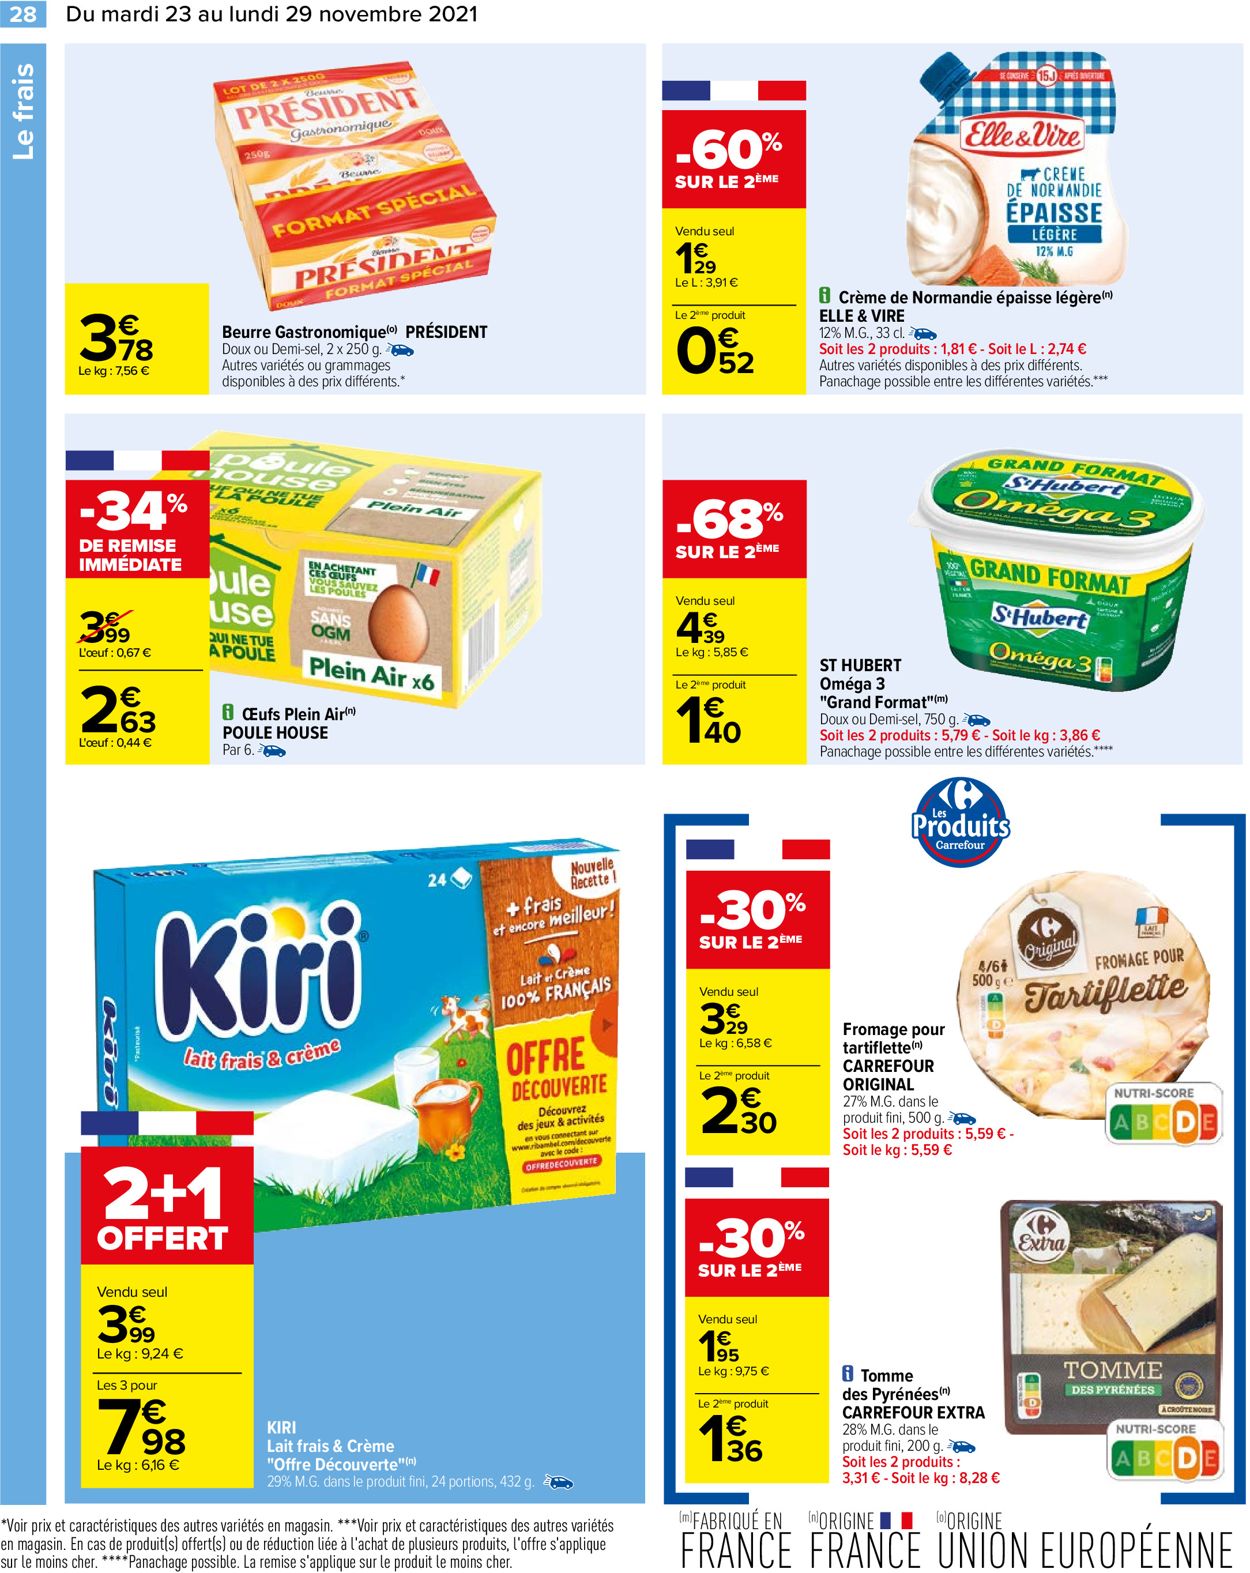 Carrefour BLACK WEEK 2021 Catalogue - 23.11-29.11.2021 (Page 28)